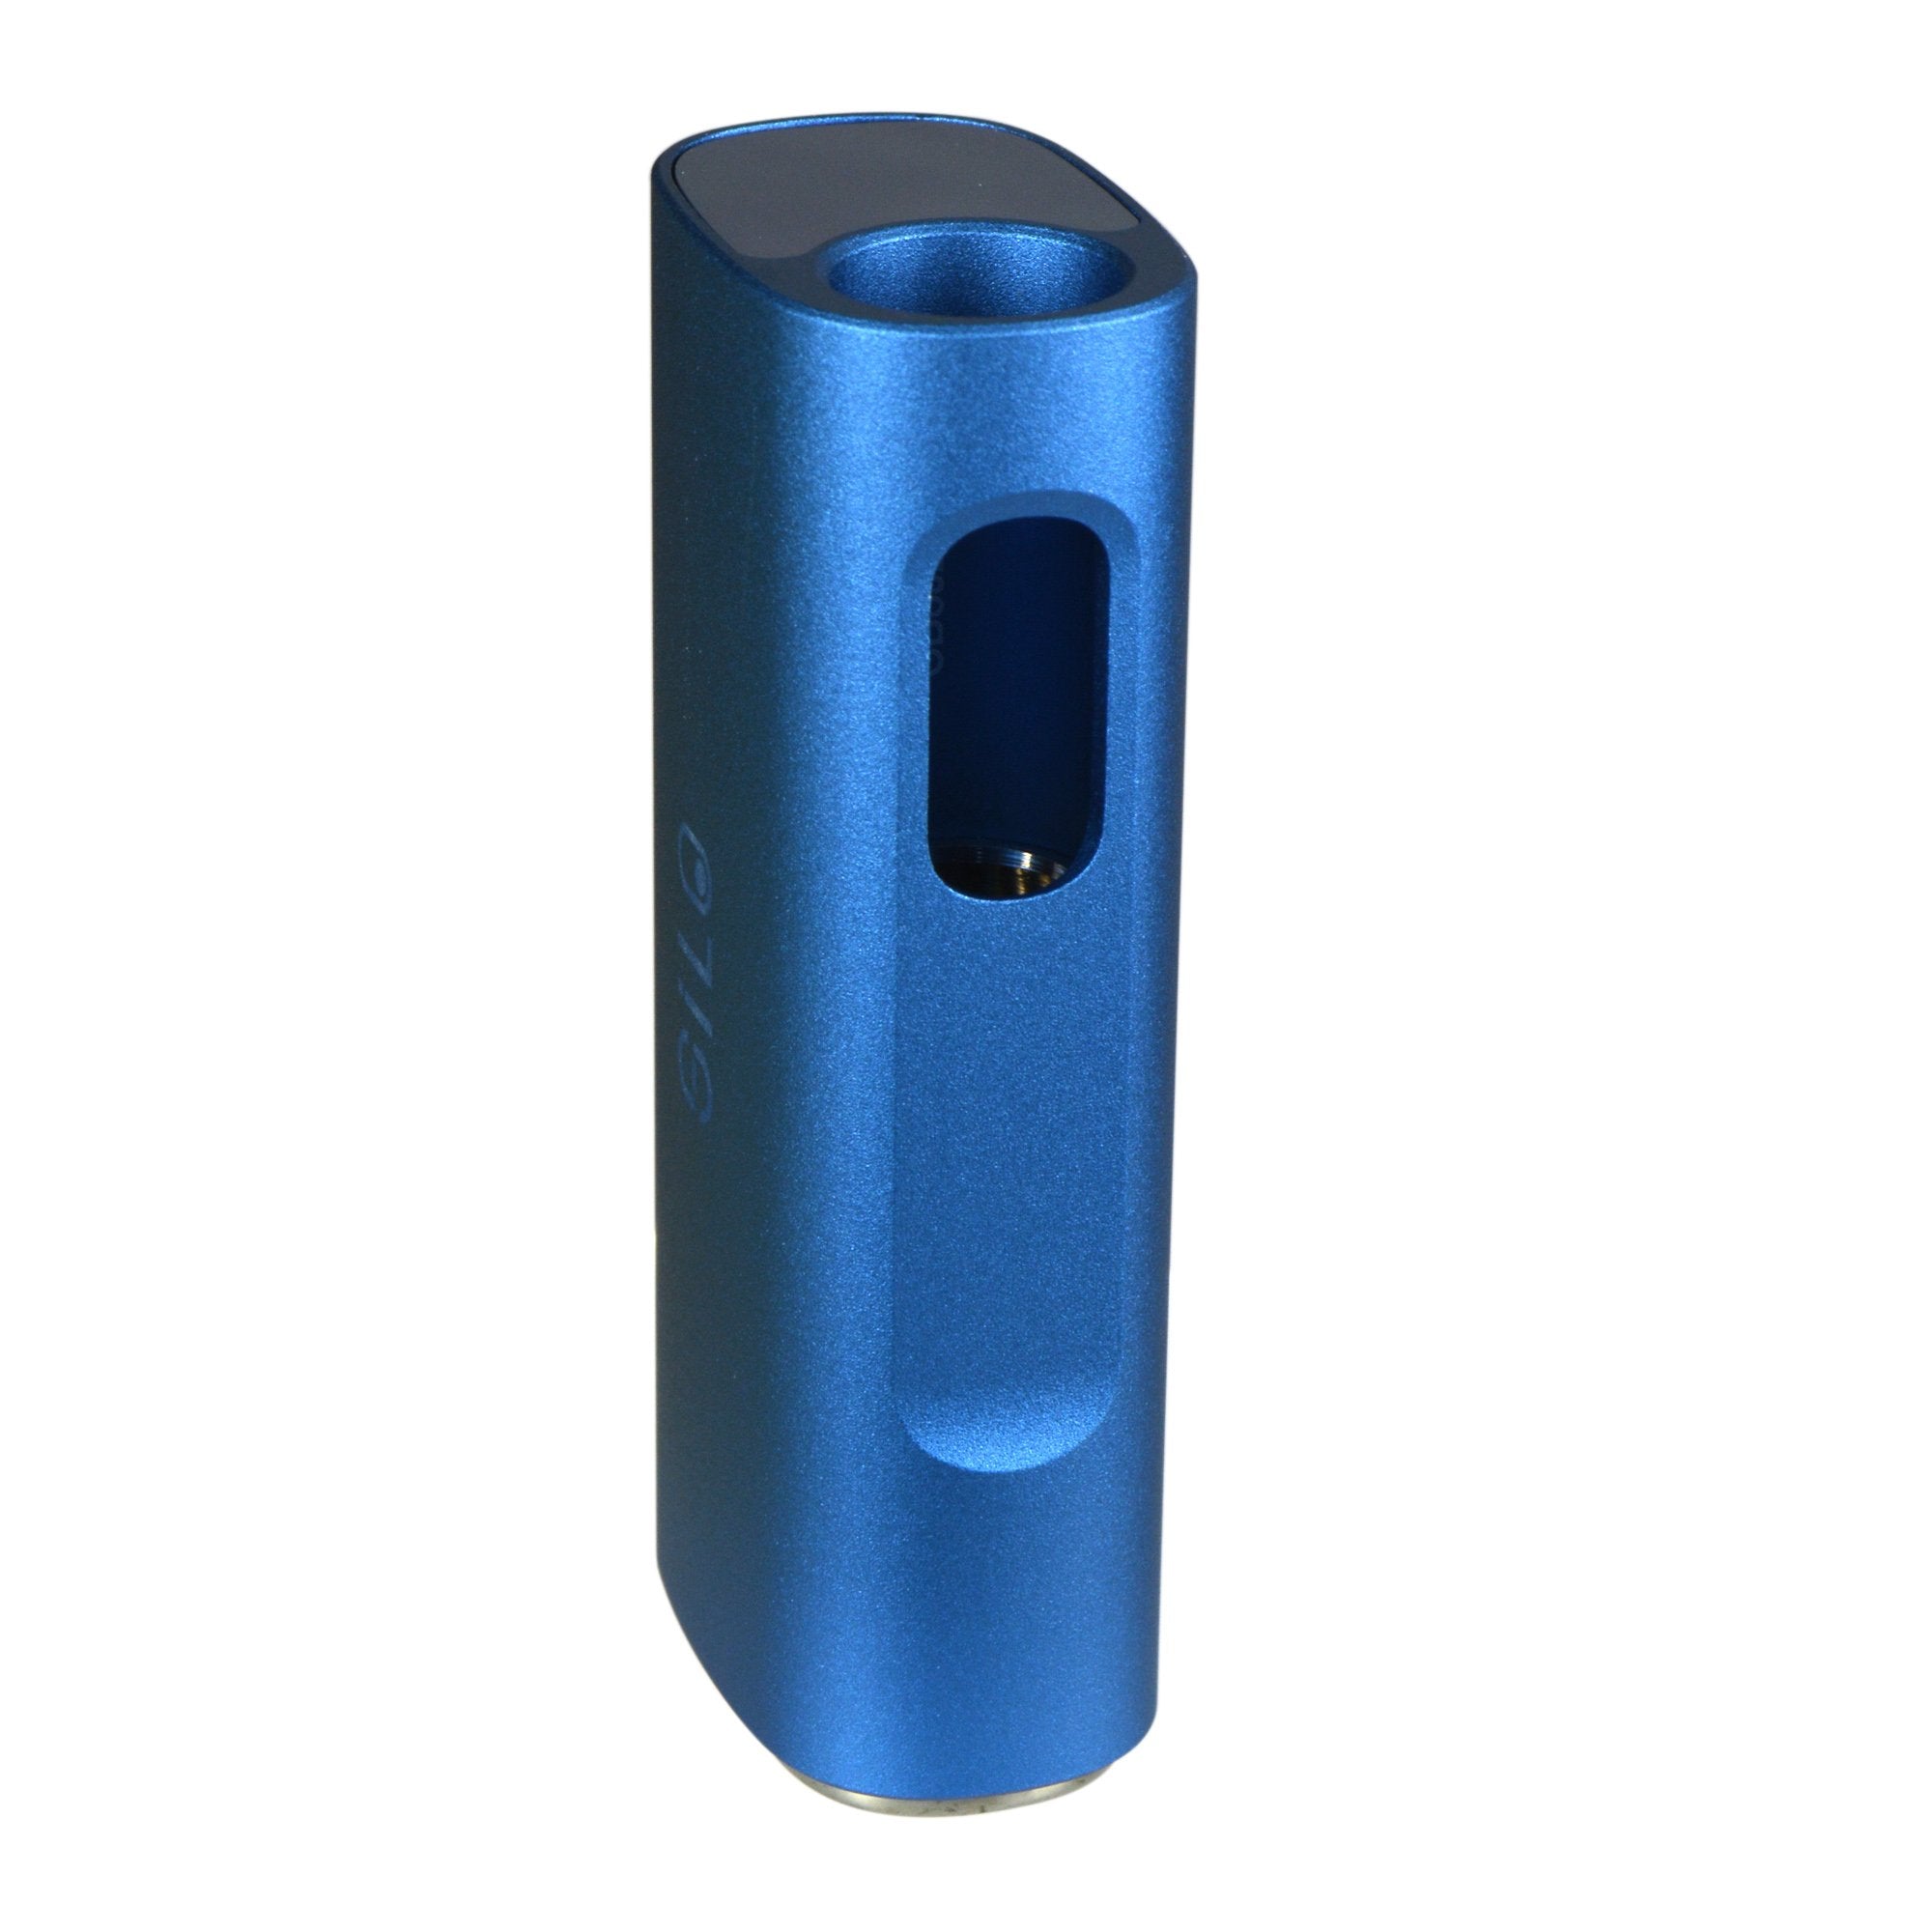 CCELL | Silo Vape Battery with USB Charger | 500mAh - Blue - 510 Thread - 4